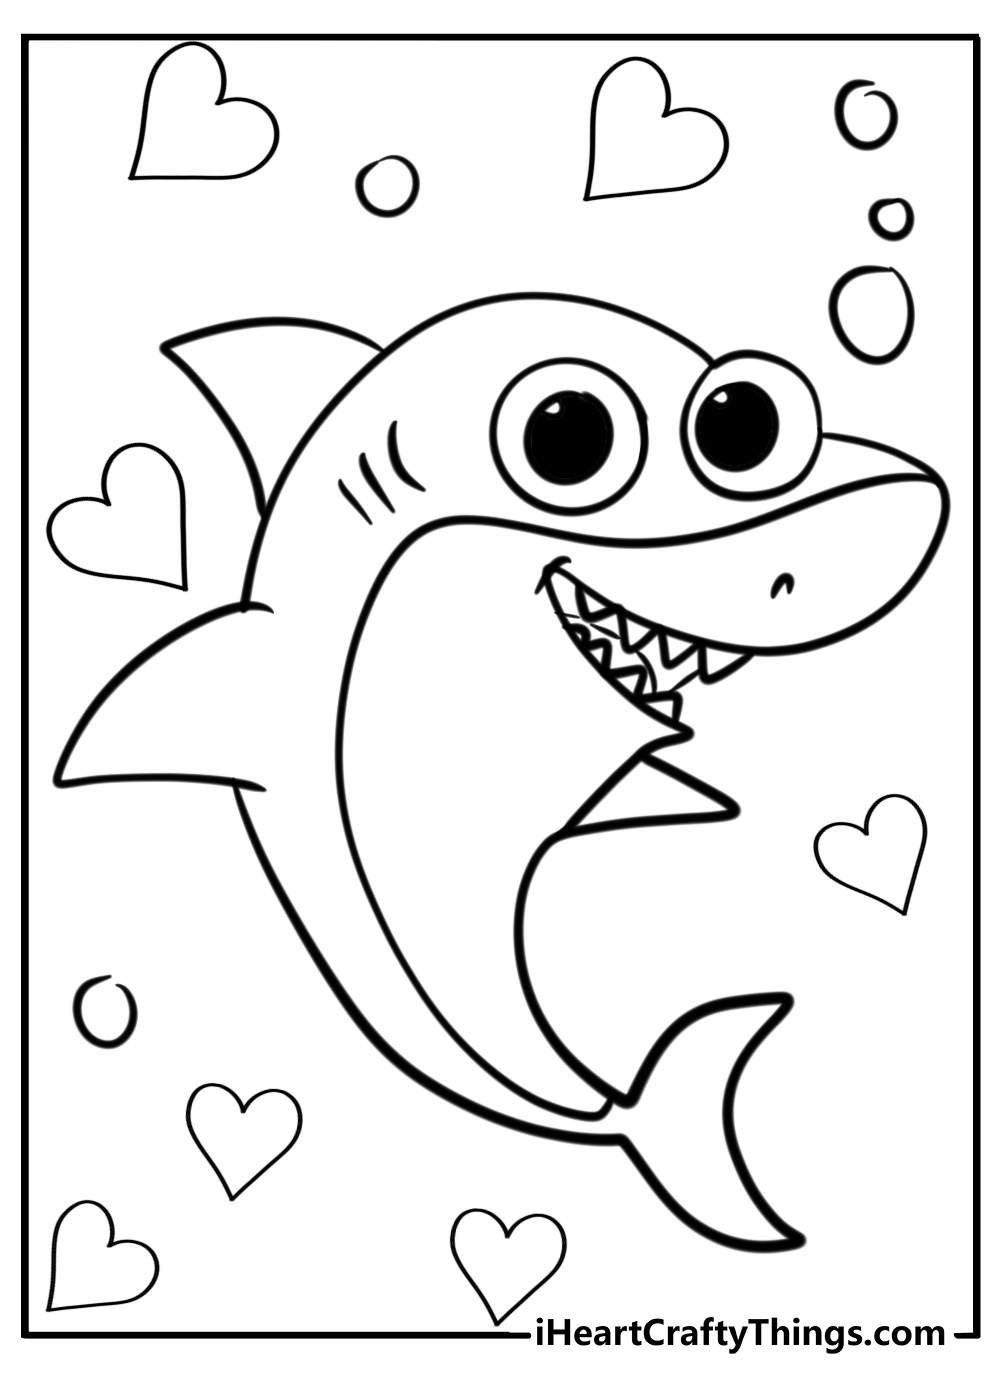 Cute shark coloring page with pacifier